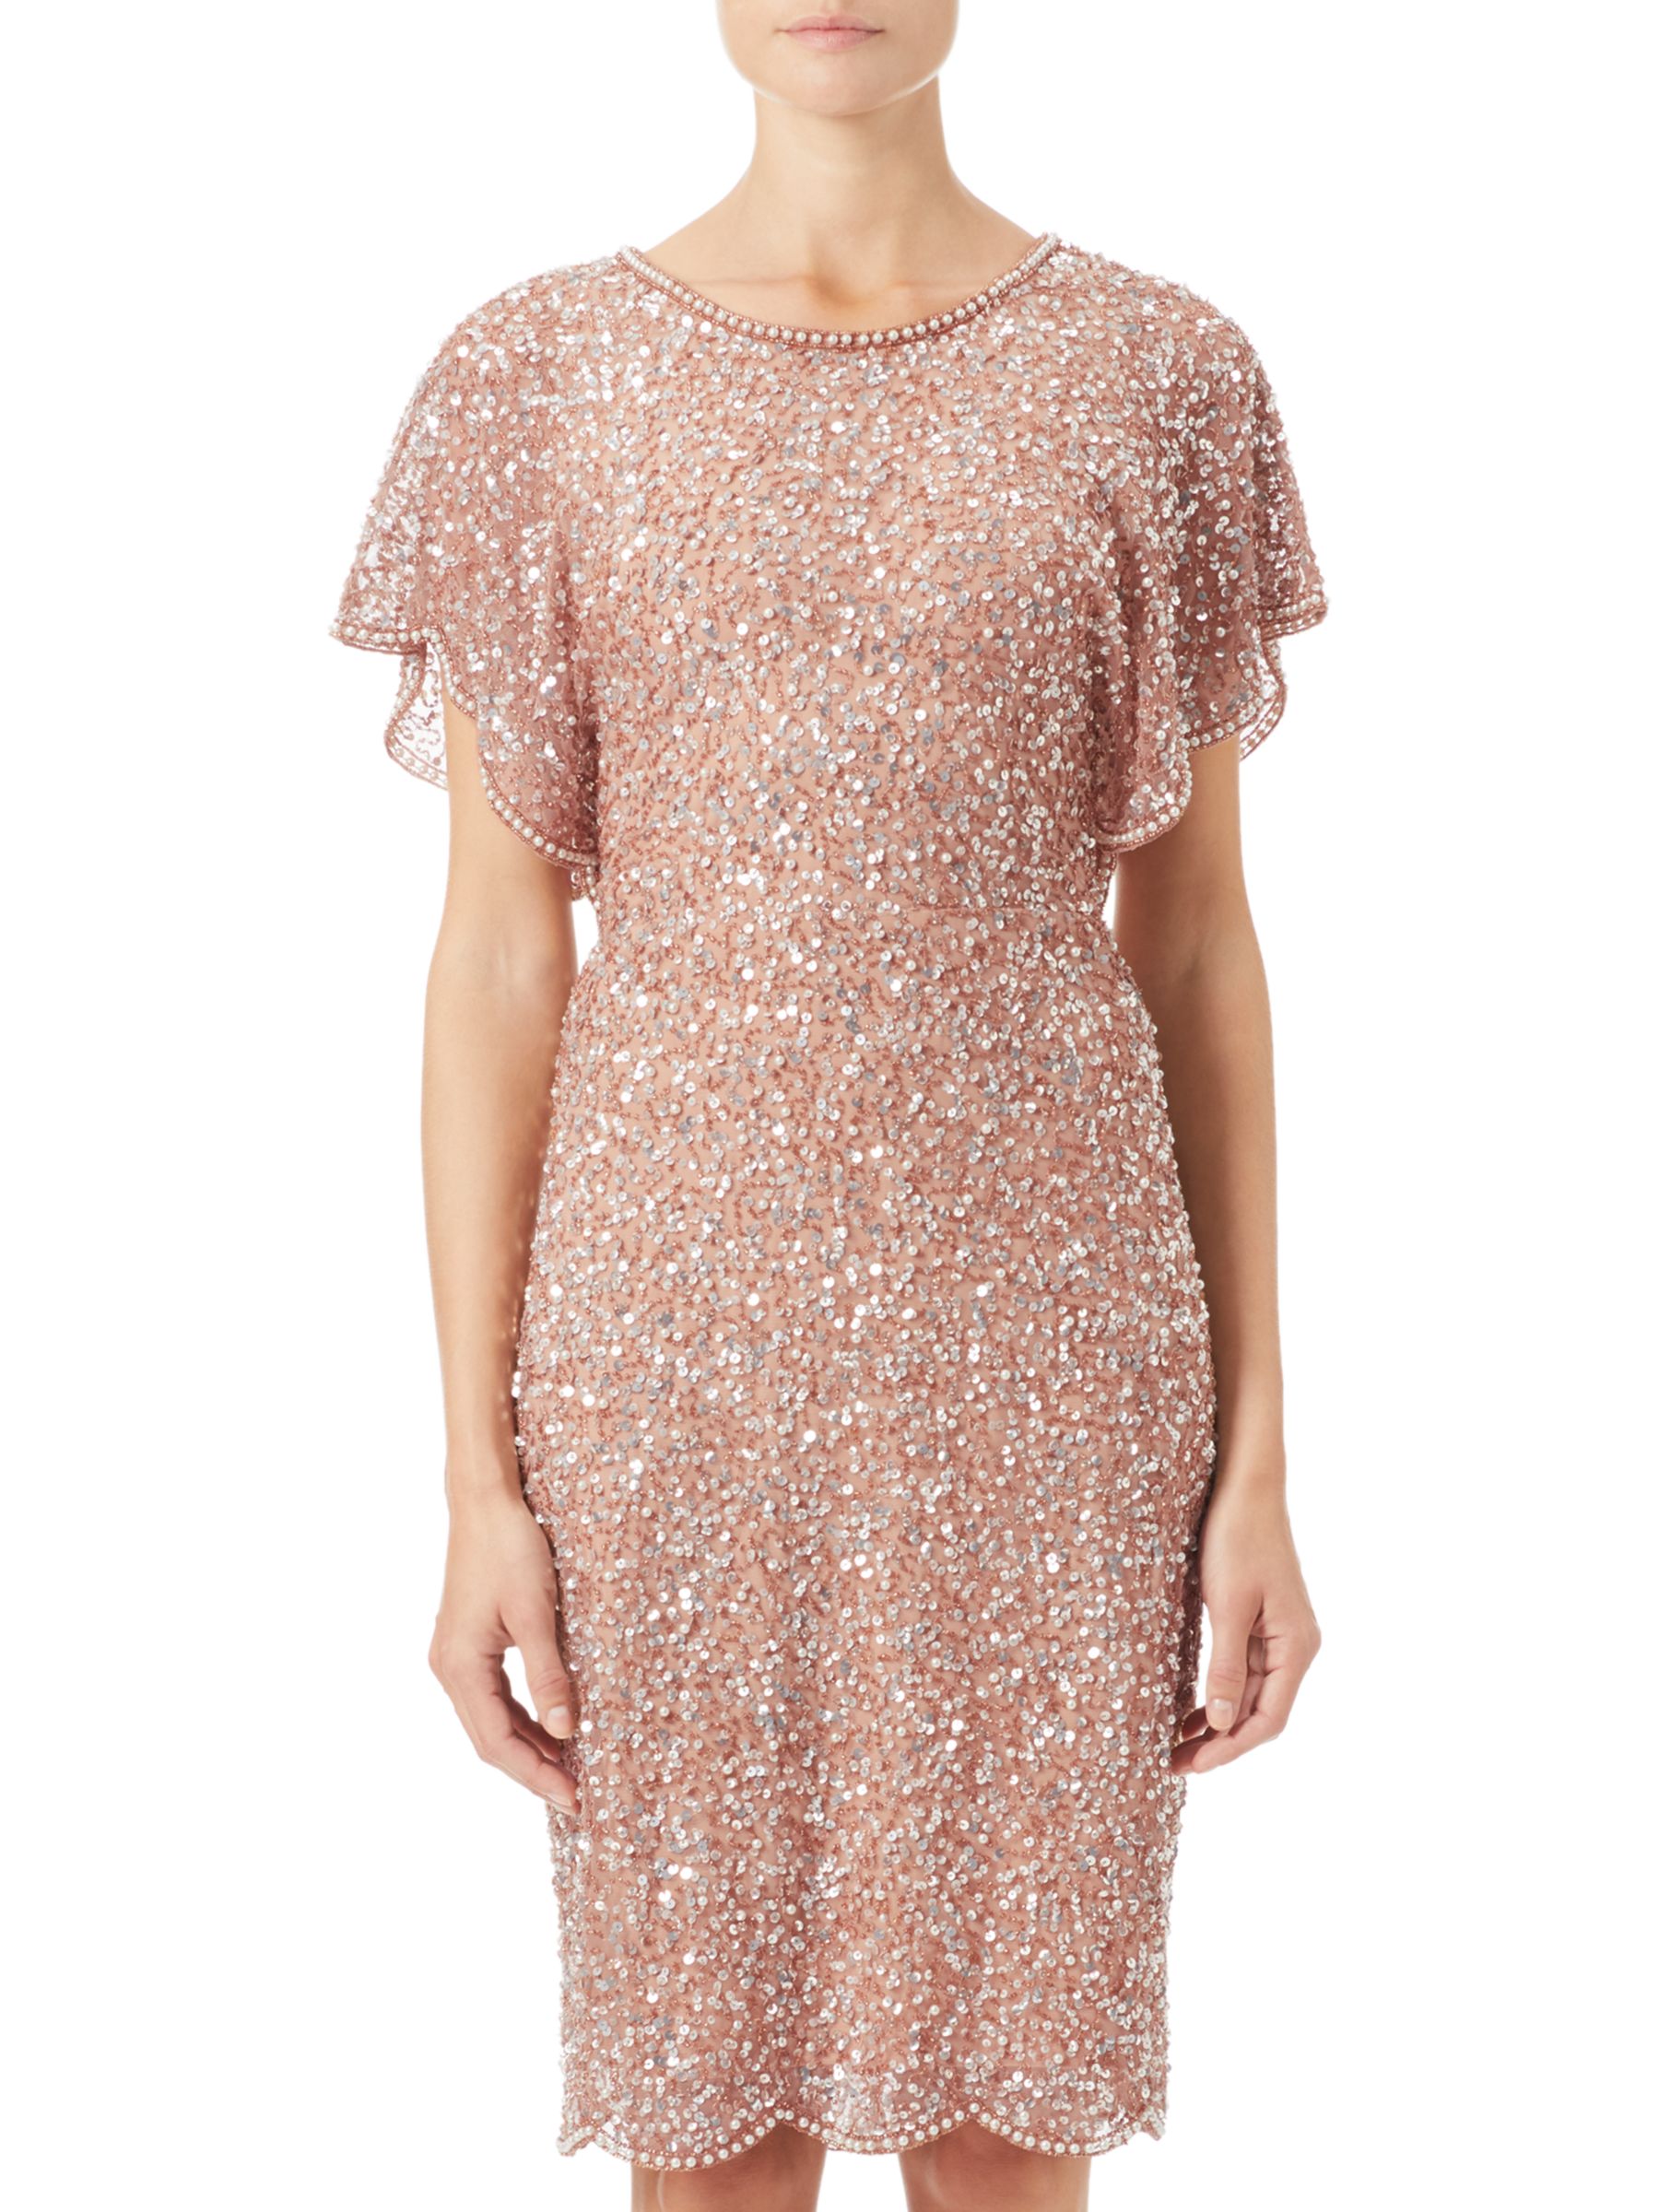 Adrianna Papell Flutter Sleeve Beaded Dress Rose Gold At John Lewis And Partners